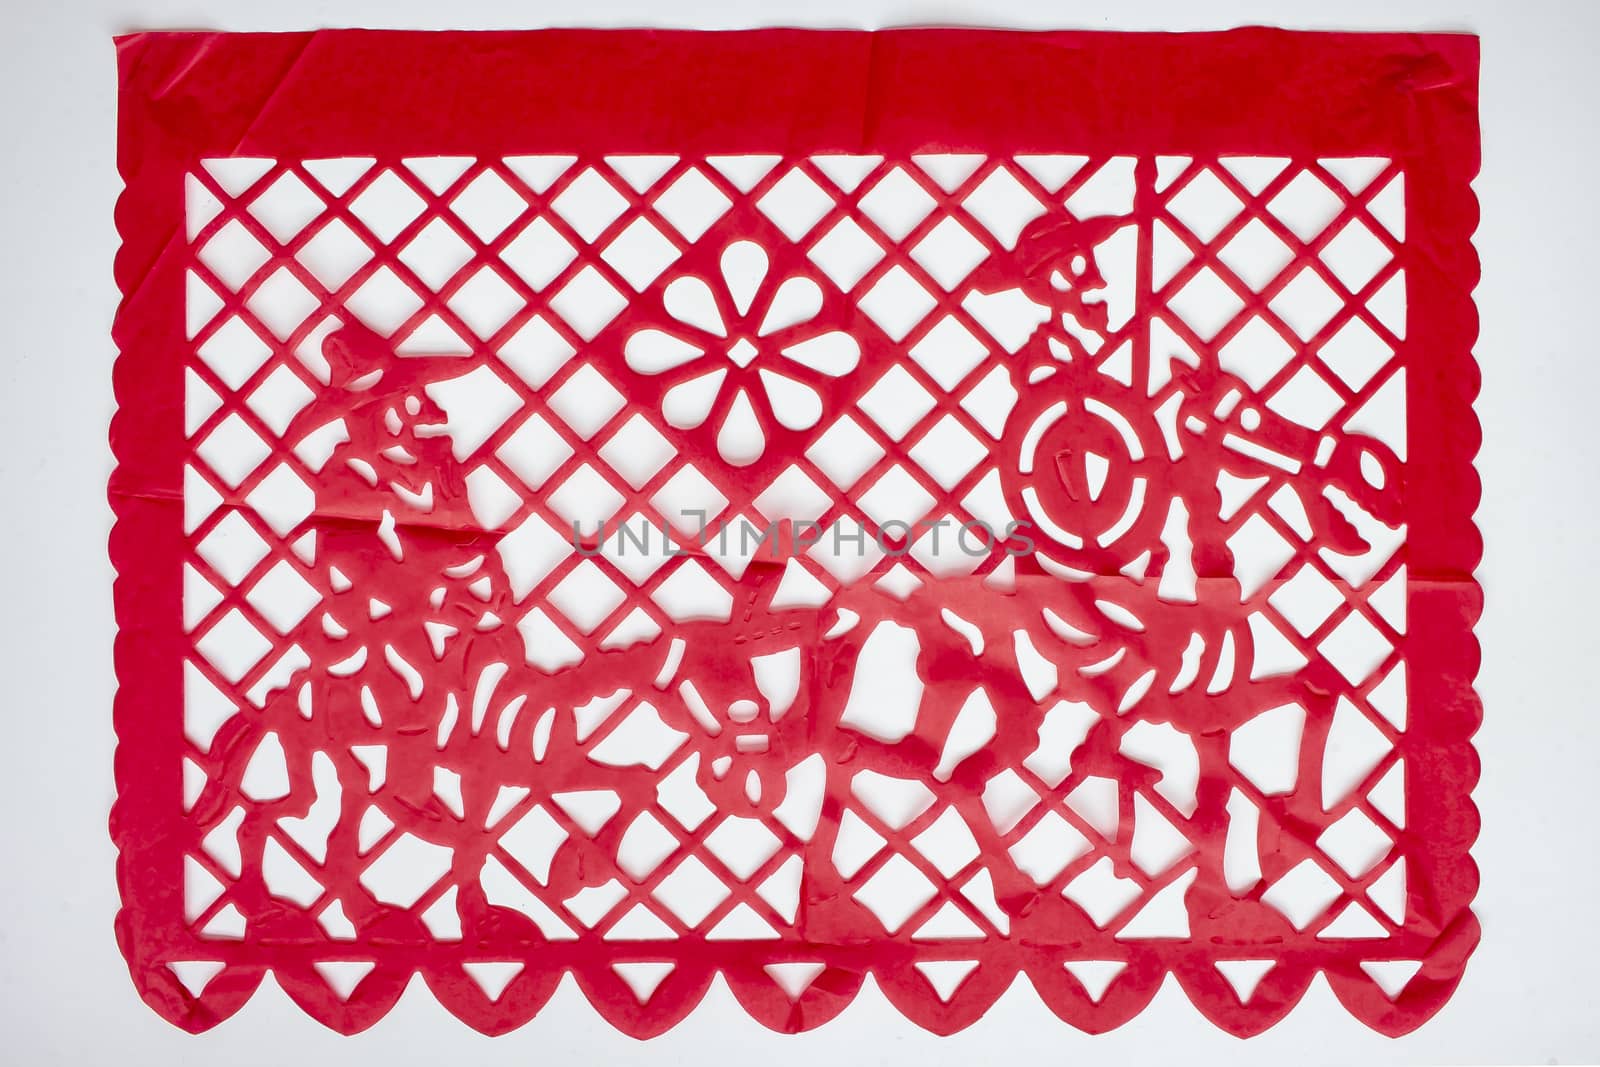 Day of the Dead, Papel Picado. Red Real traditional Mexican paper cutting flag. Isolated on white background.